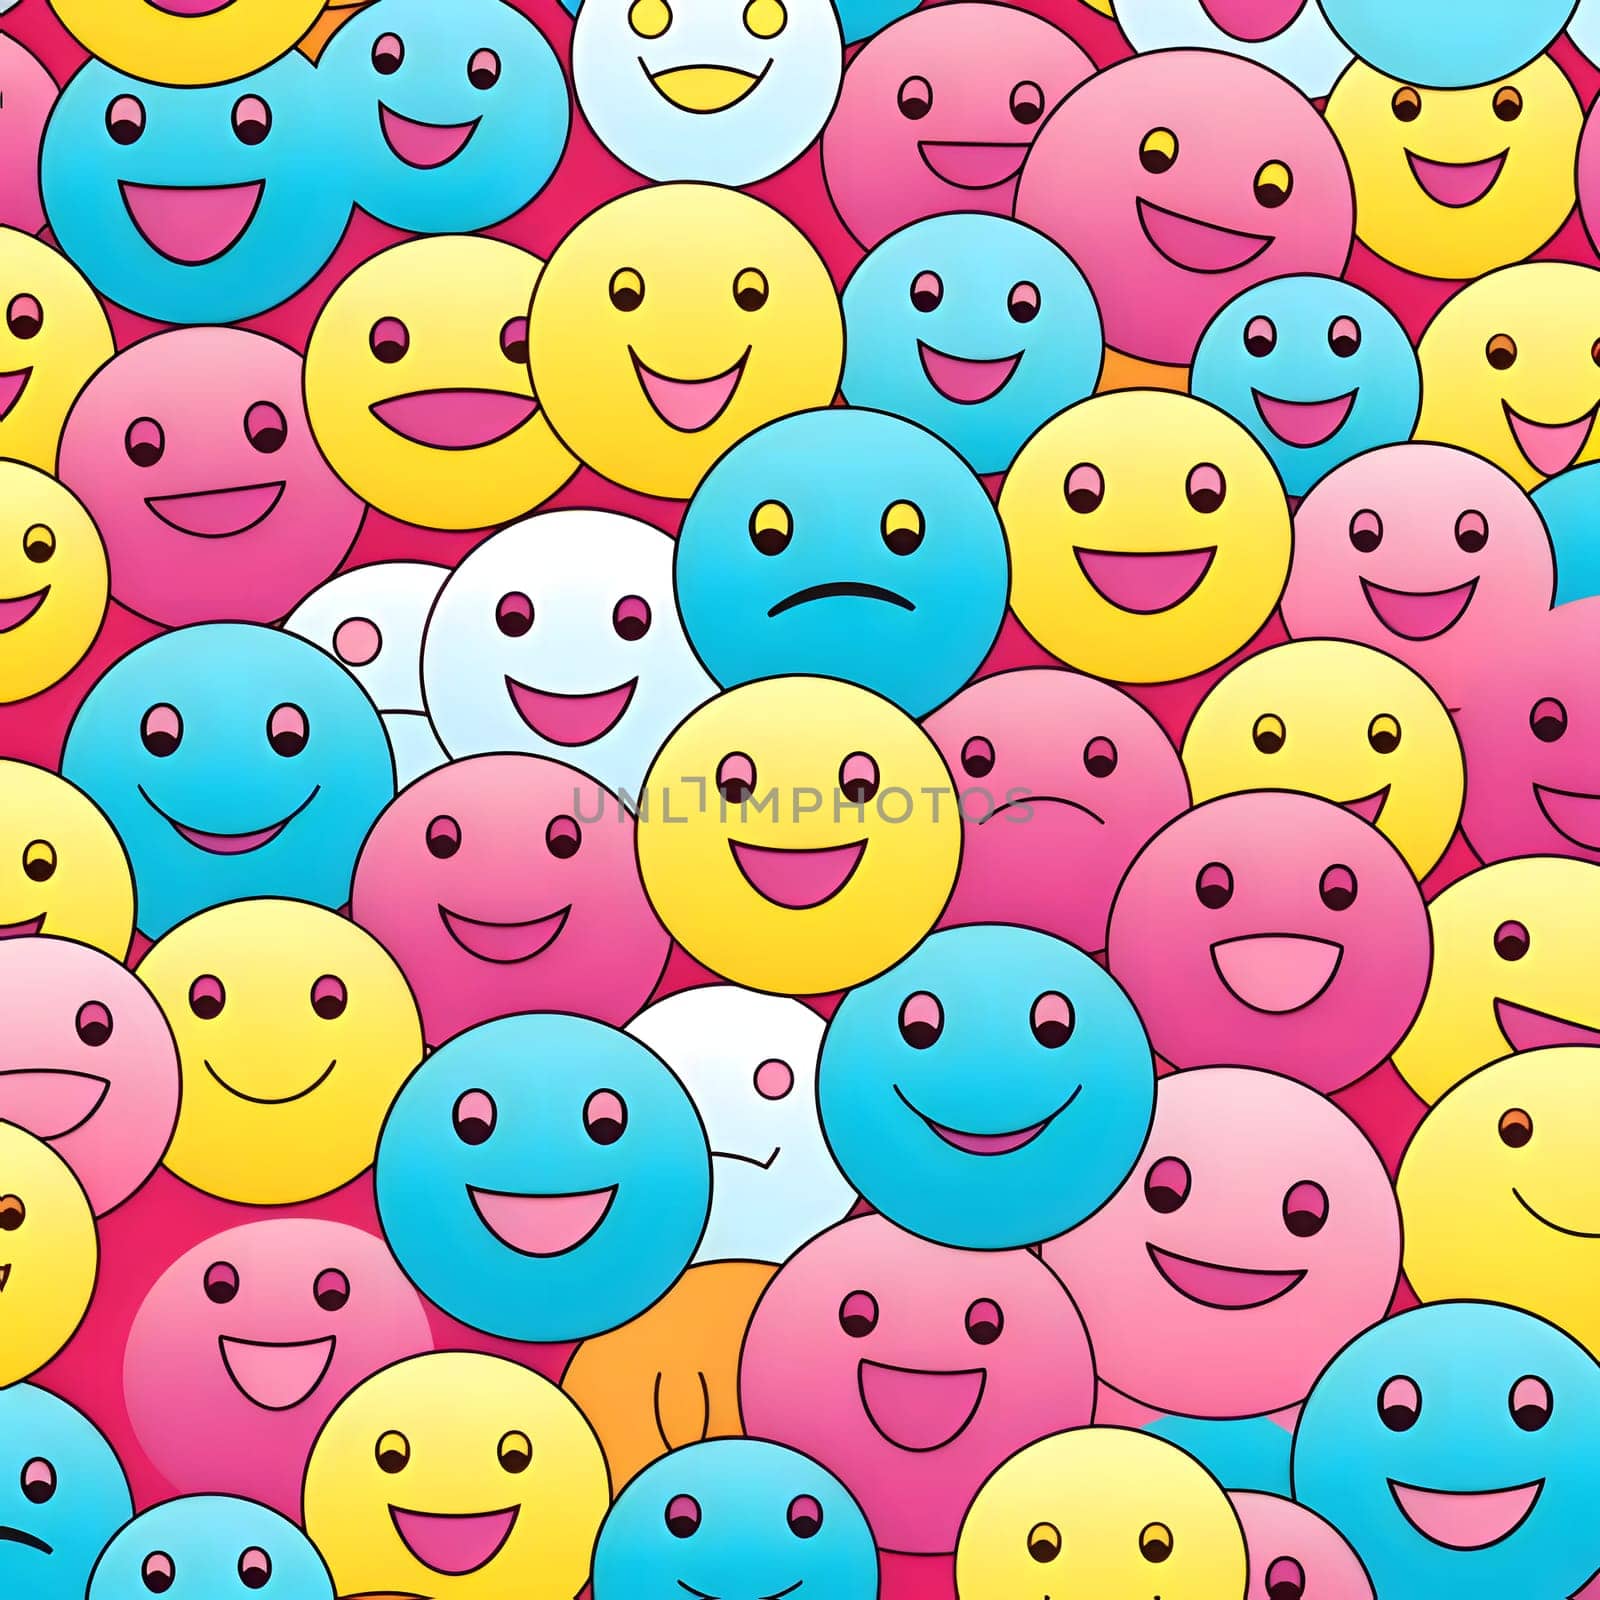 Patterns and banners backgrounds: Smiling emoticons. Seamless pattern. Vector illustration.